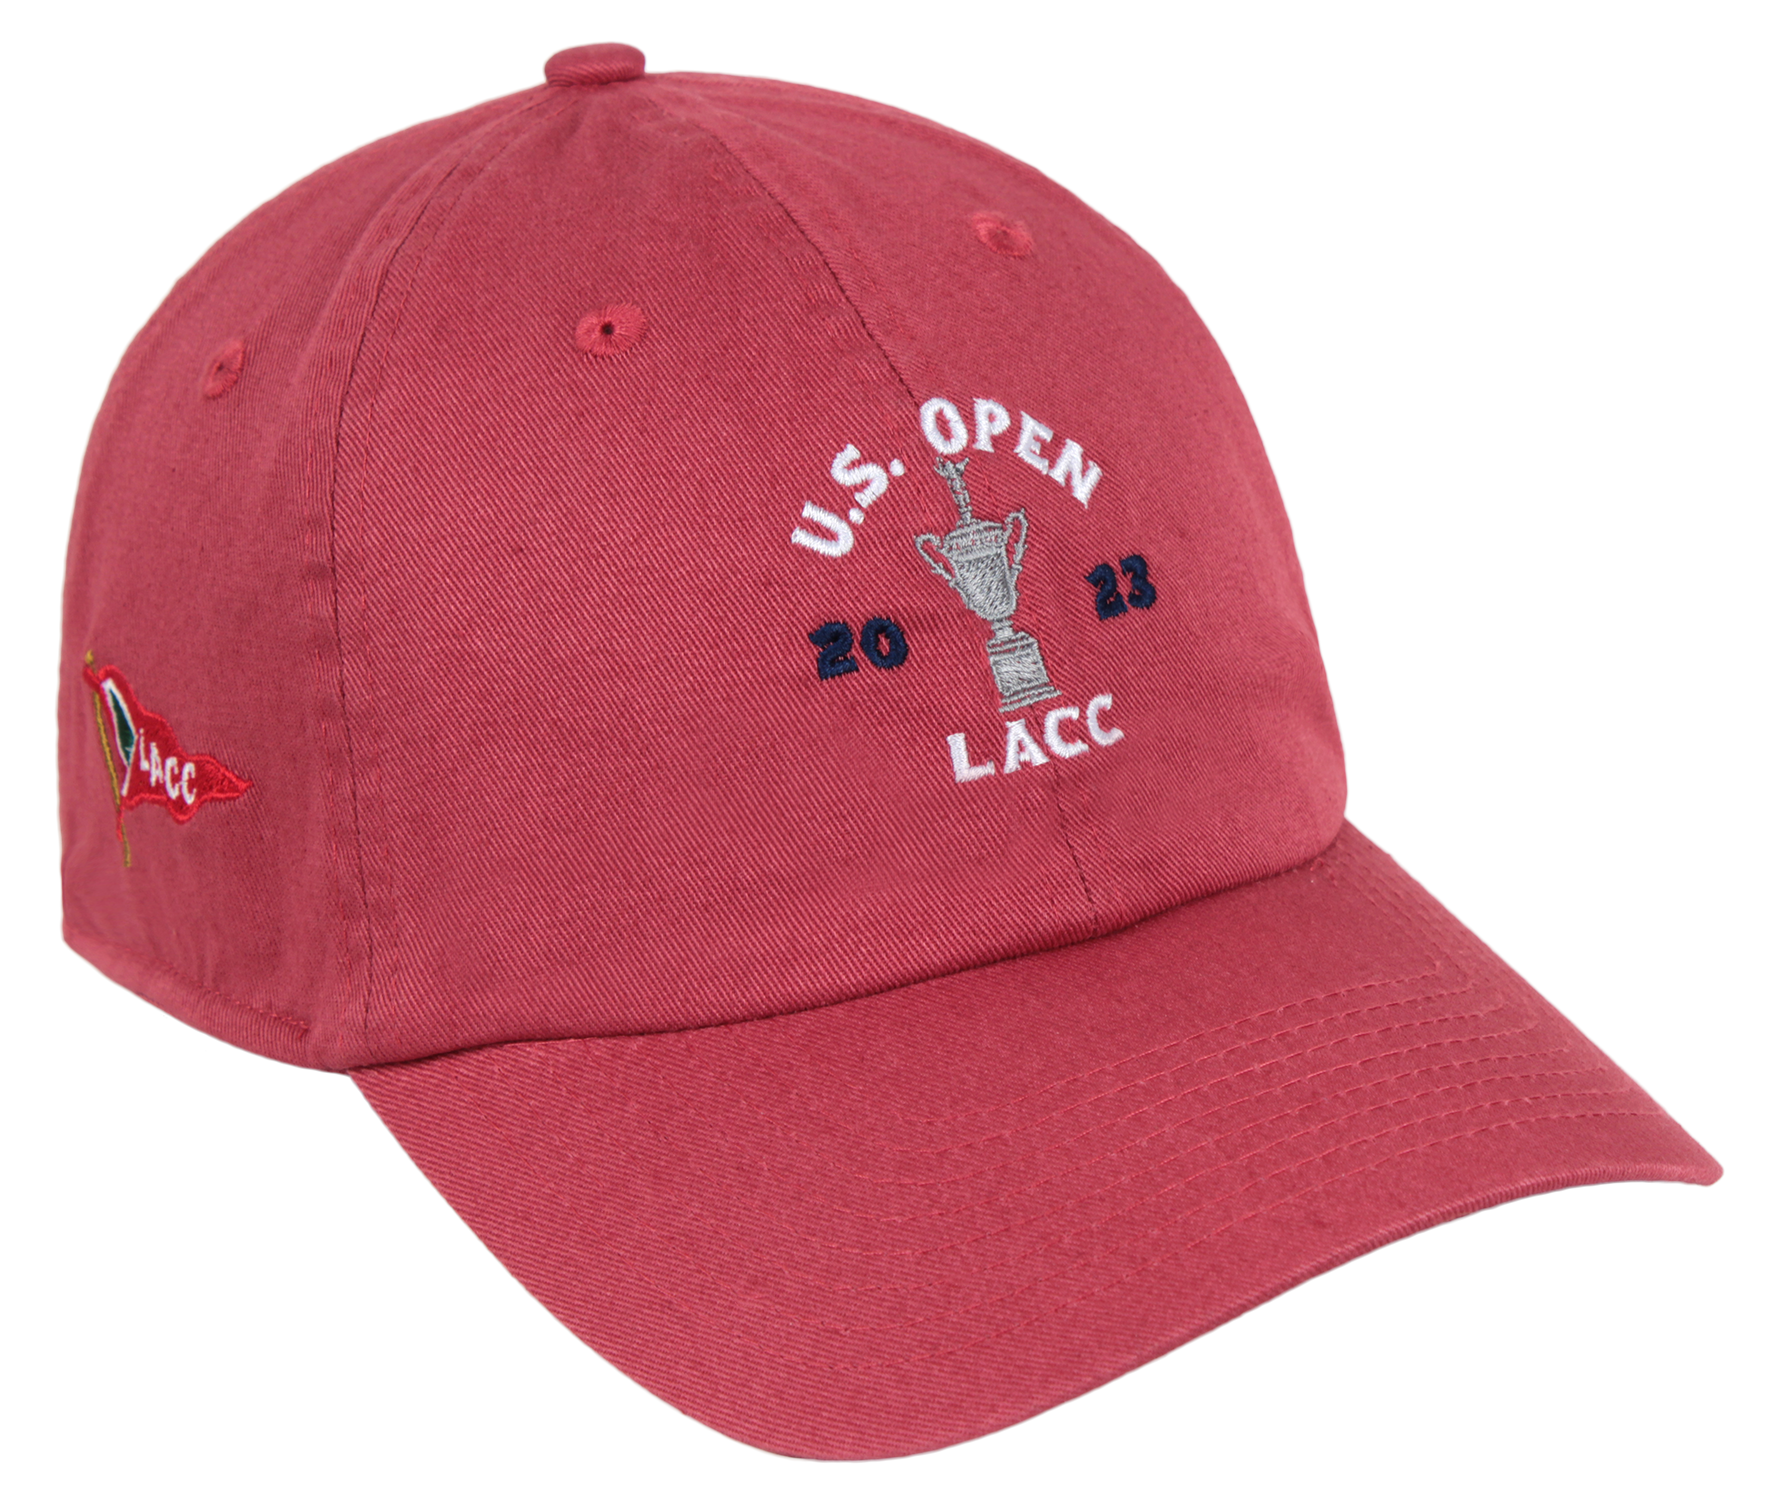 U.S. Open Cap USA Relaxed – Red Fit Twill Shop Washed Ahead Cotton